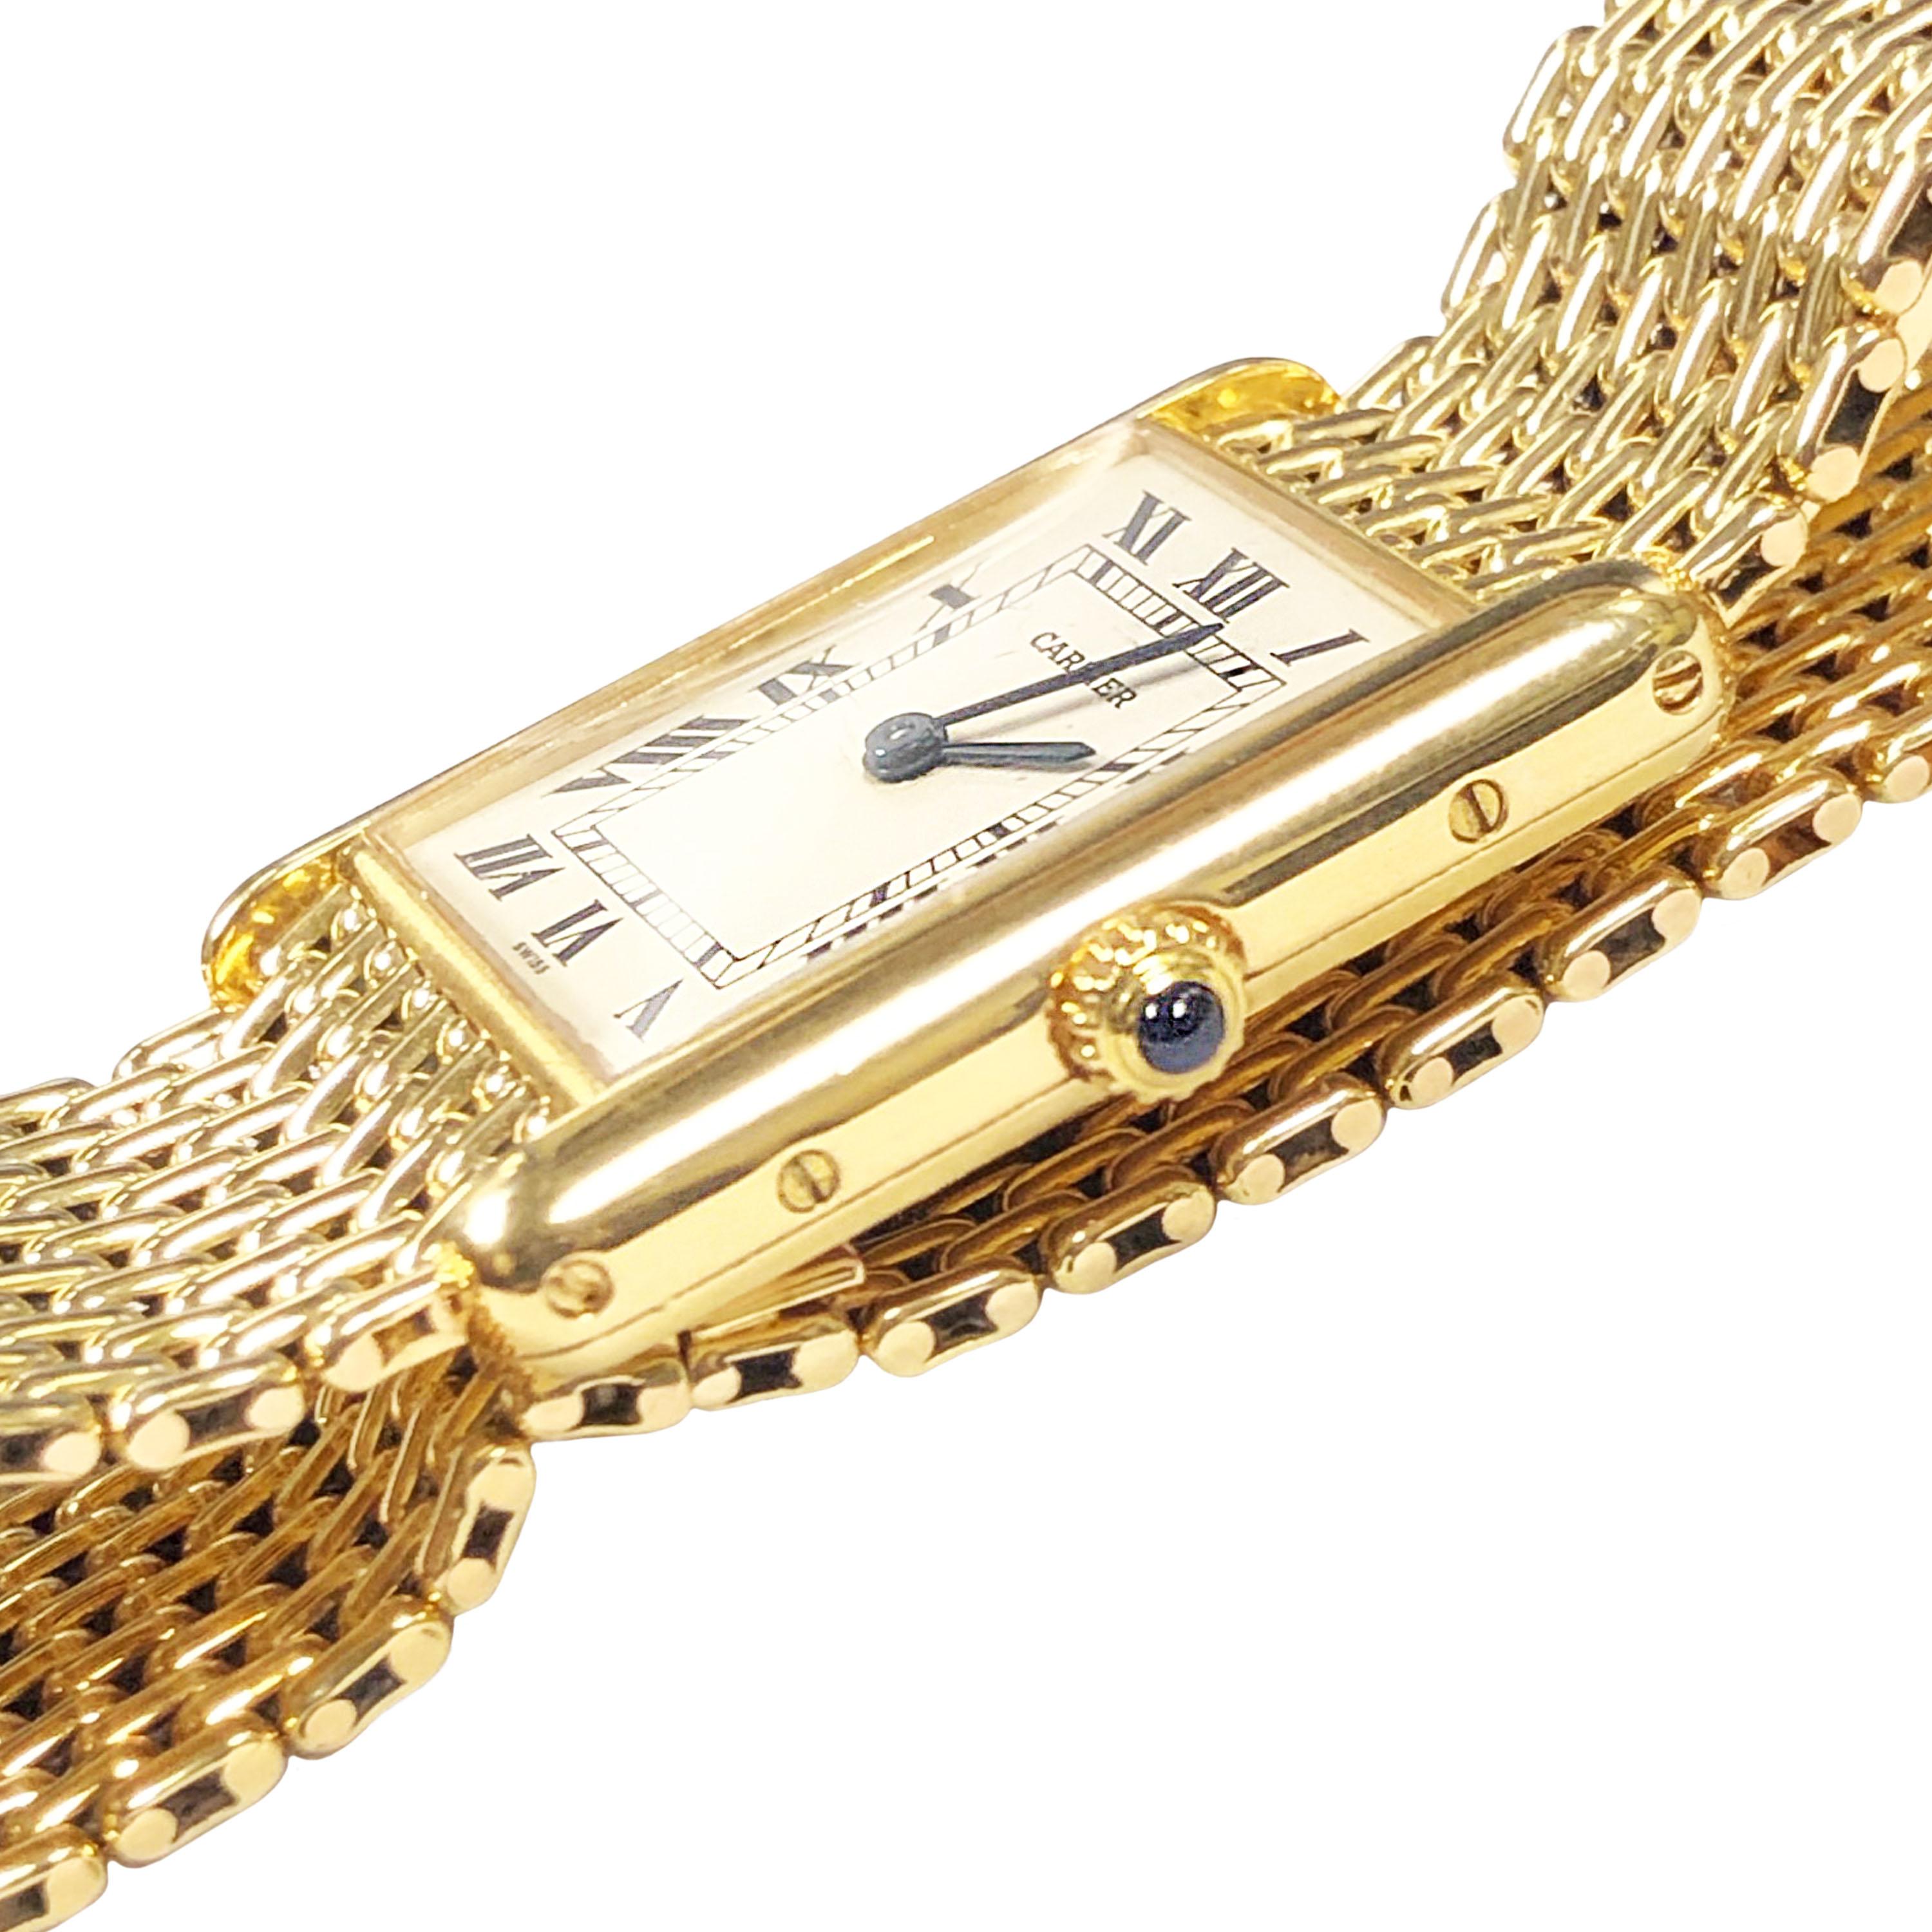 Circa 2000 Cartier Classic Tank Wrist Watch, 30 X 24 MM  18k Yellow Gold 2 piece case. Quartz movement, White Dial with Black Roman Numerals and a Sapphire Crown. 11/16 inch wide 18K yellow Gold Woven Link Bracelet with Deployment buckle. Watch